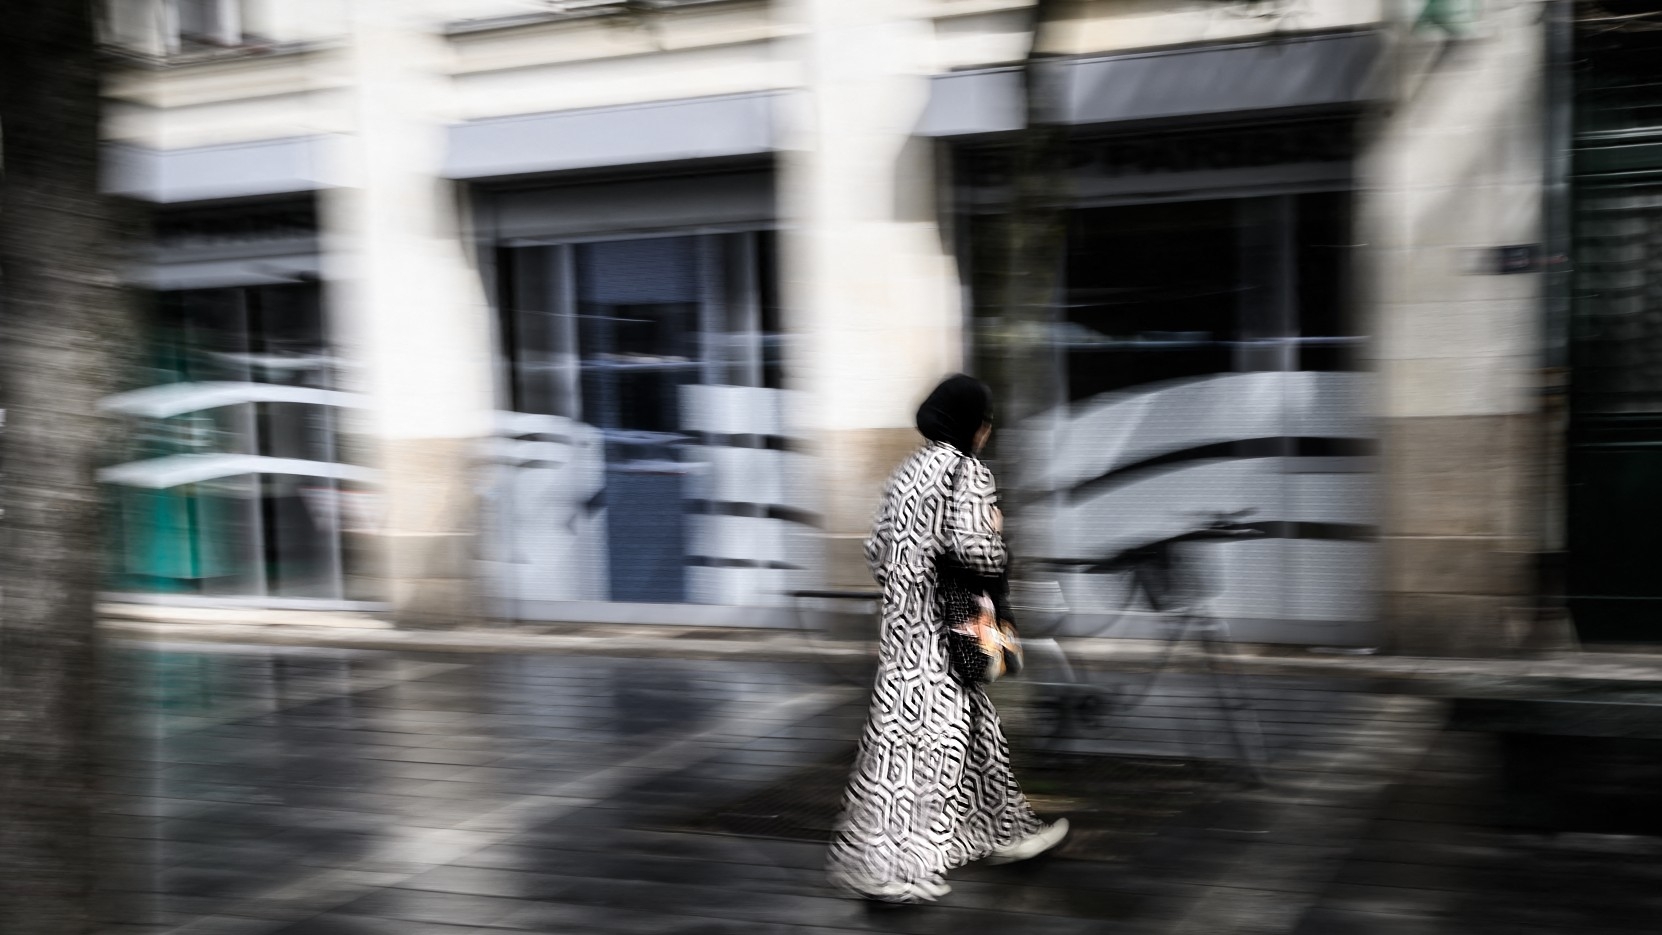 A young woman wears an Abaya as she crosses a street in Nantes, western France on 31 August, 2023 (AFP)